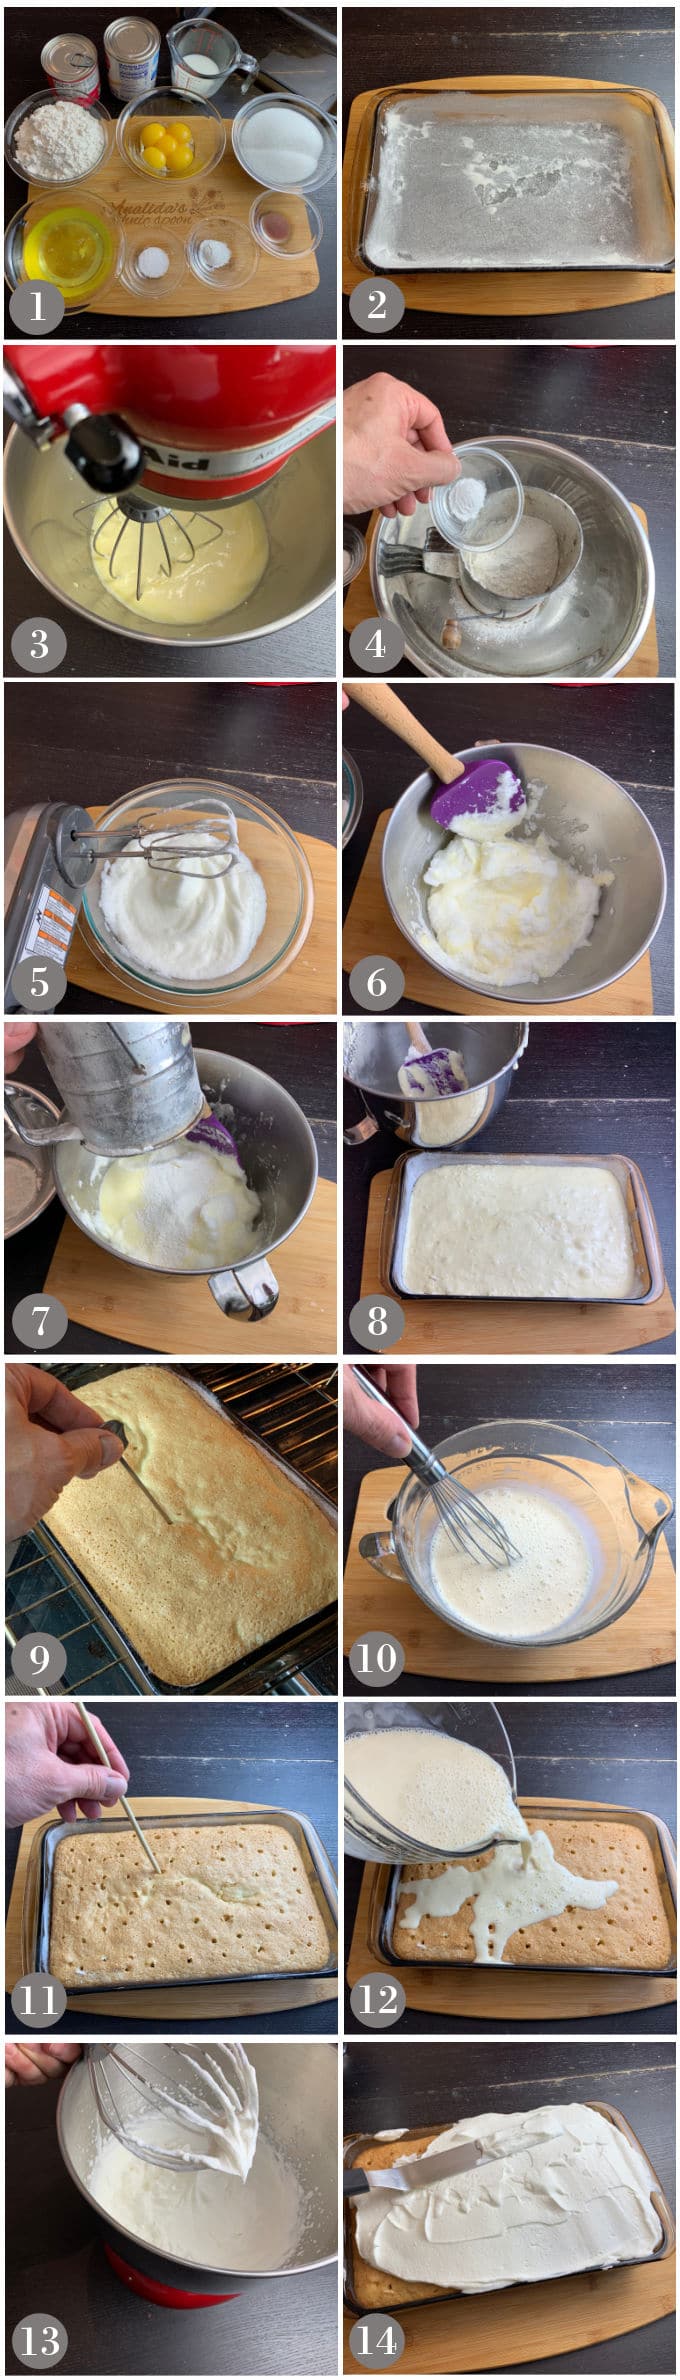 A collage of photos showing the steps to make tres leches cake.